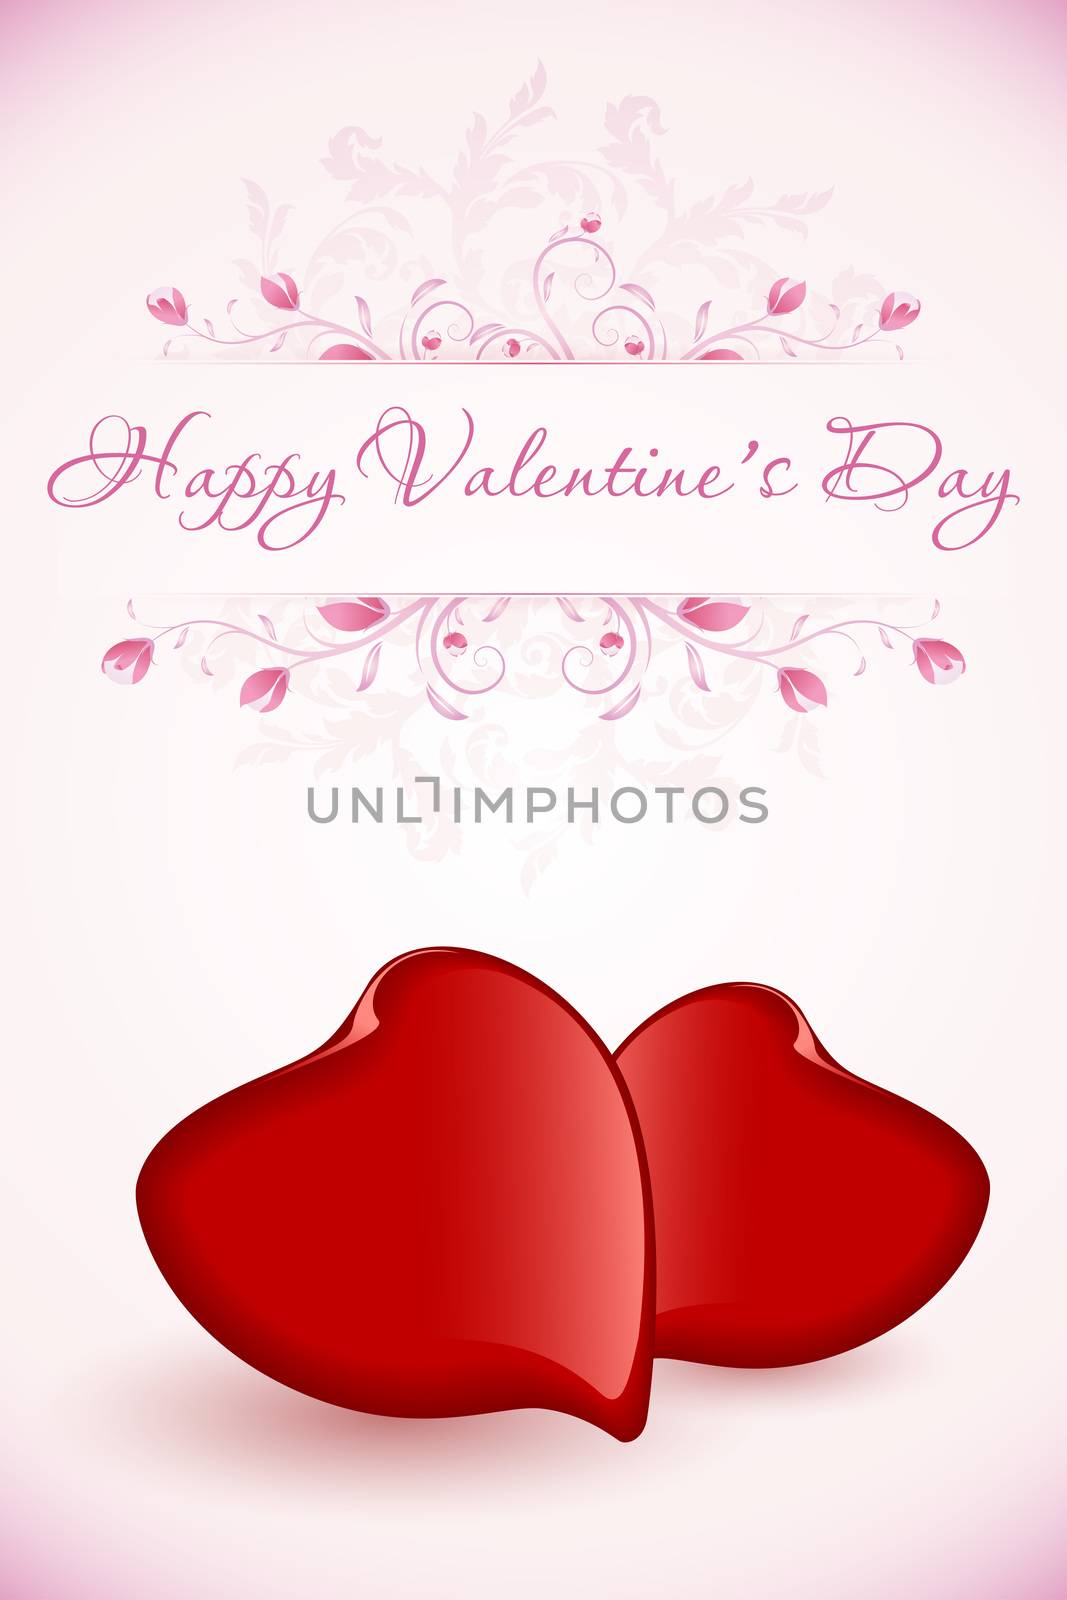 Happy Valentine's Day Floral Card - Typographical Background by WaD